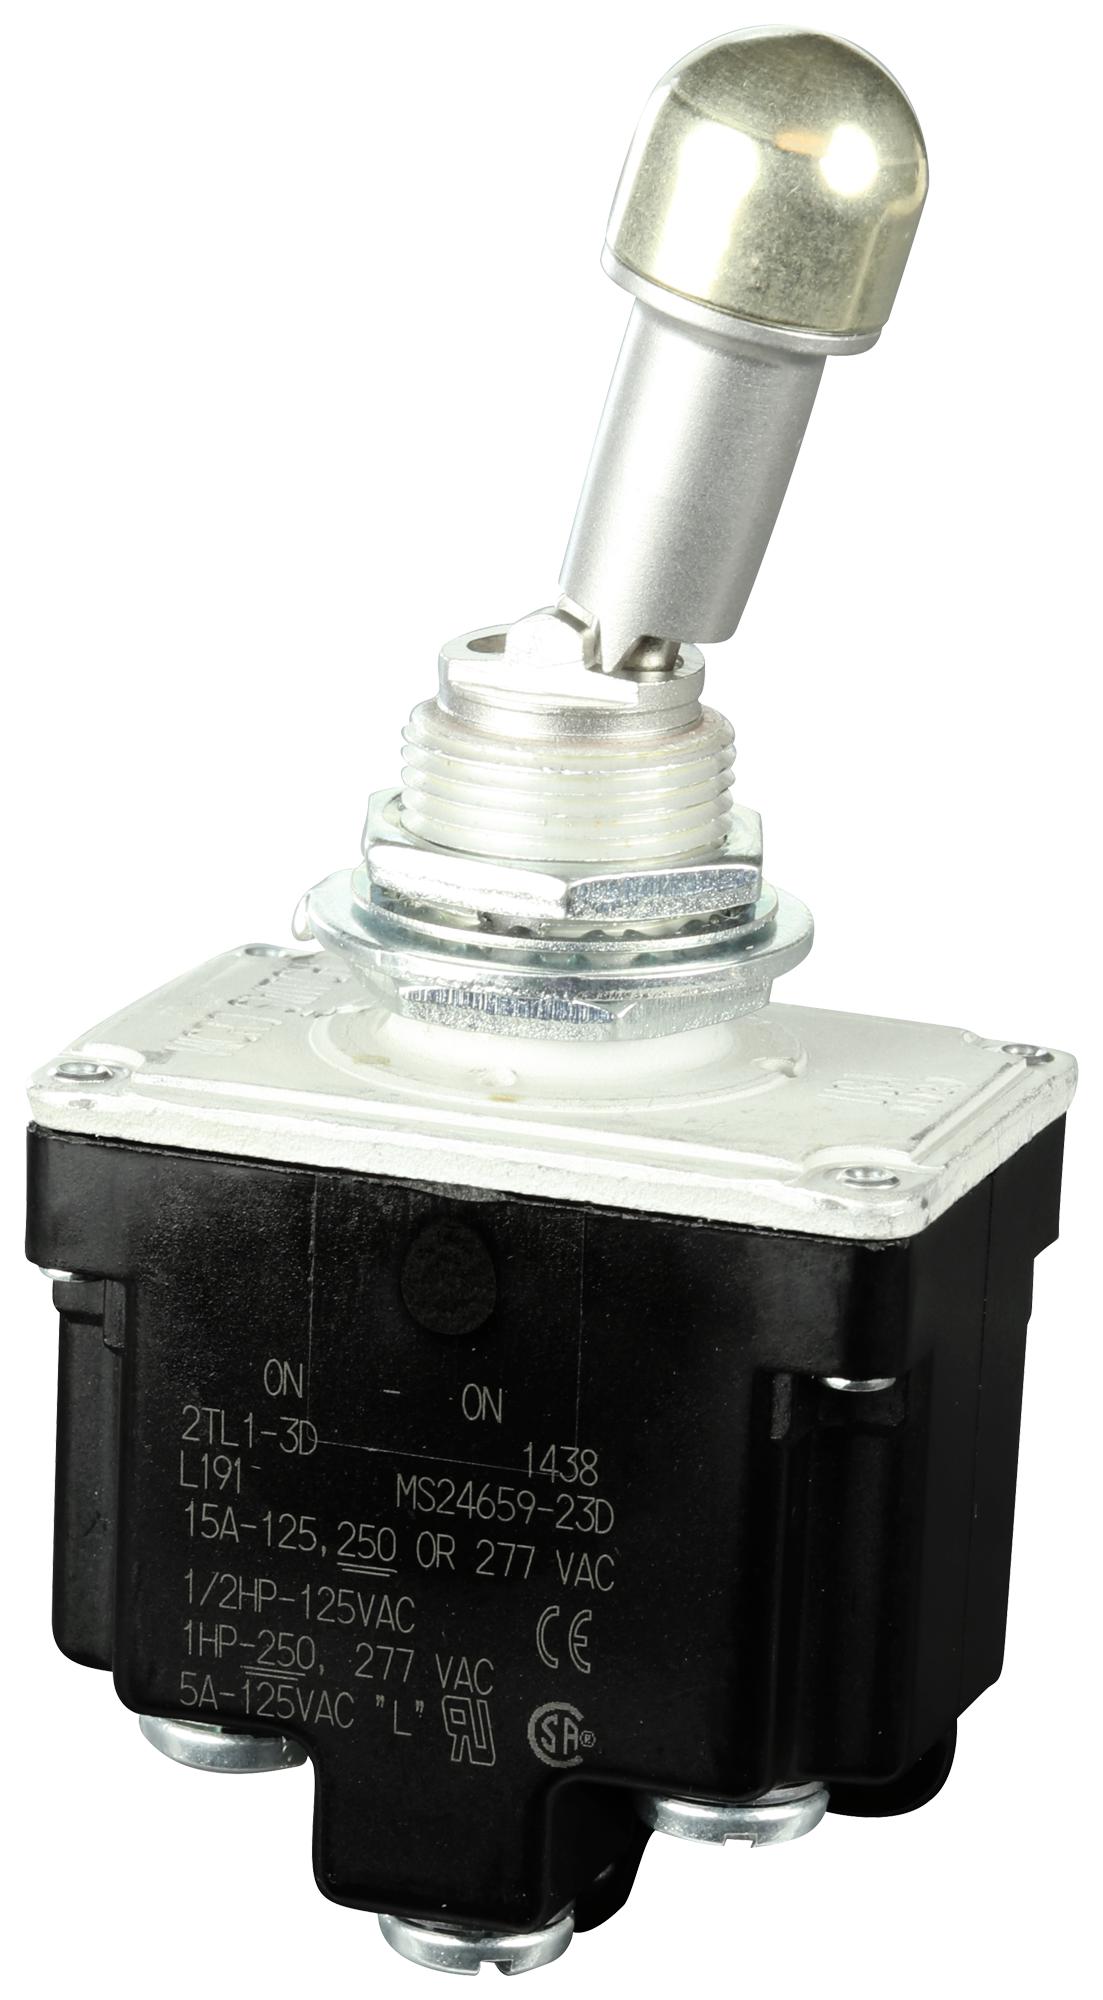 2TL1-3D SWITCH, DPDT, ON-ON HONEYWELL